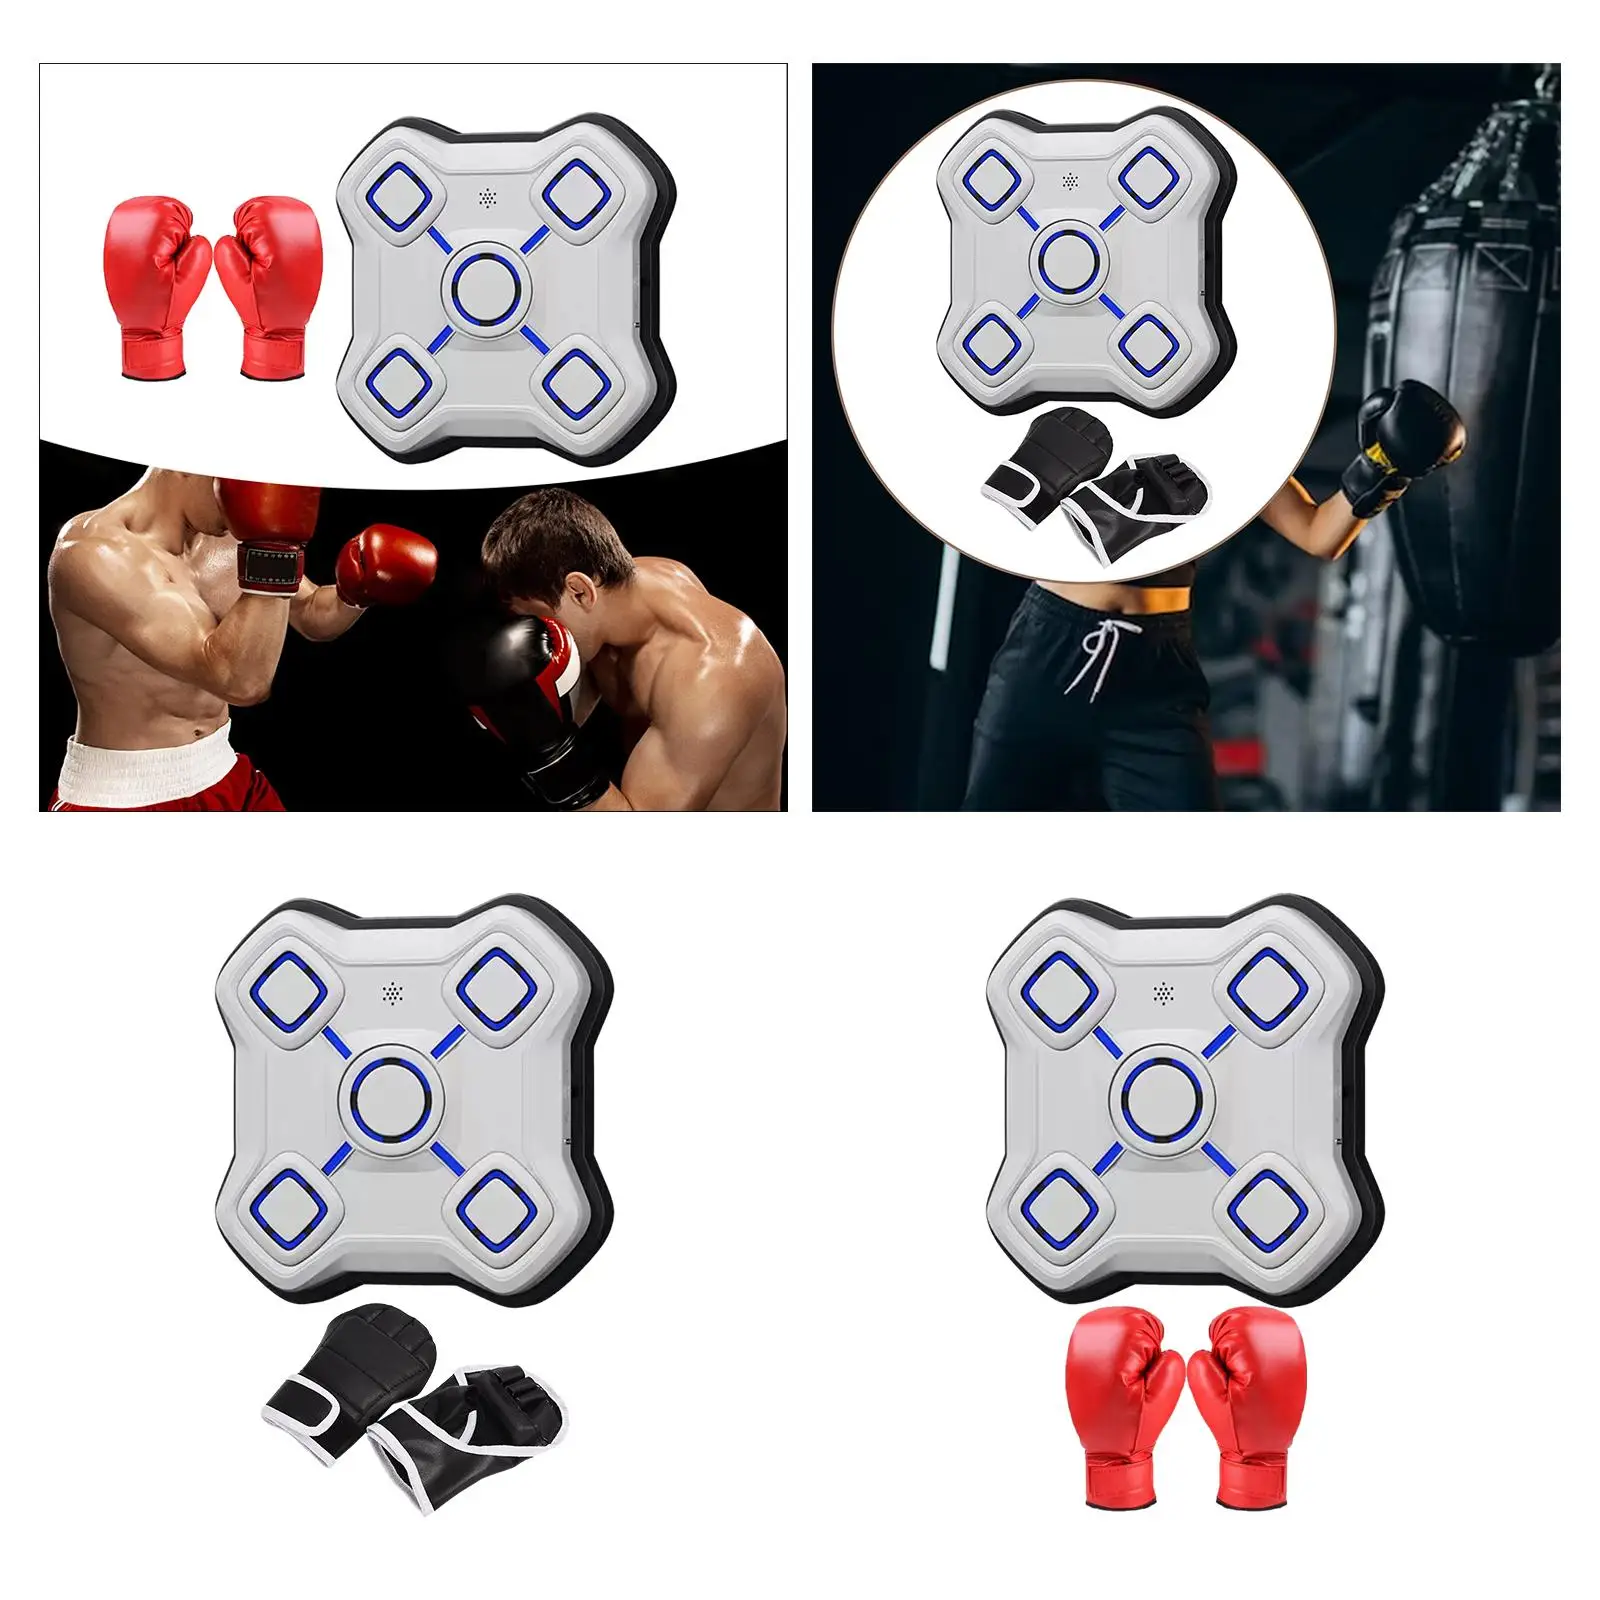 Music Boxing Machine Smart Boxing Trainer Wall Mounted Rhythm Wall Target for Reaction Response Training Martial Arts Home Sanda